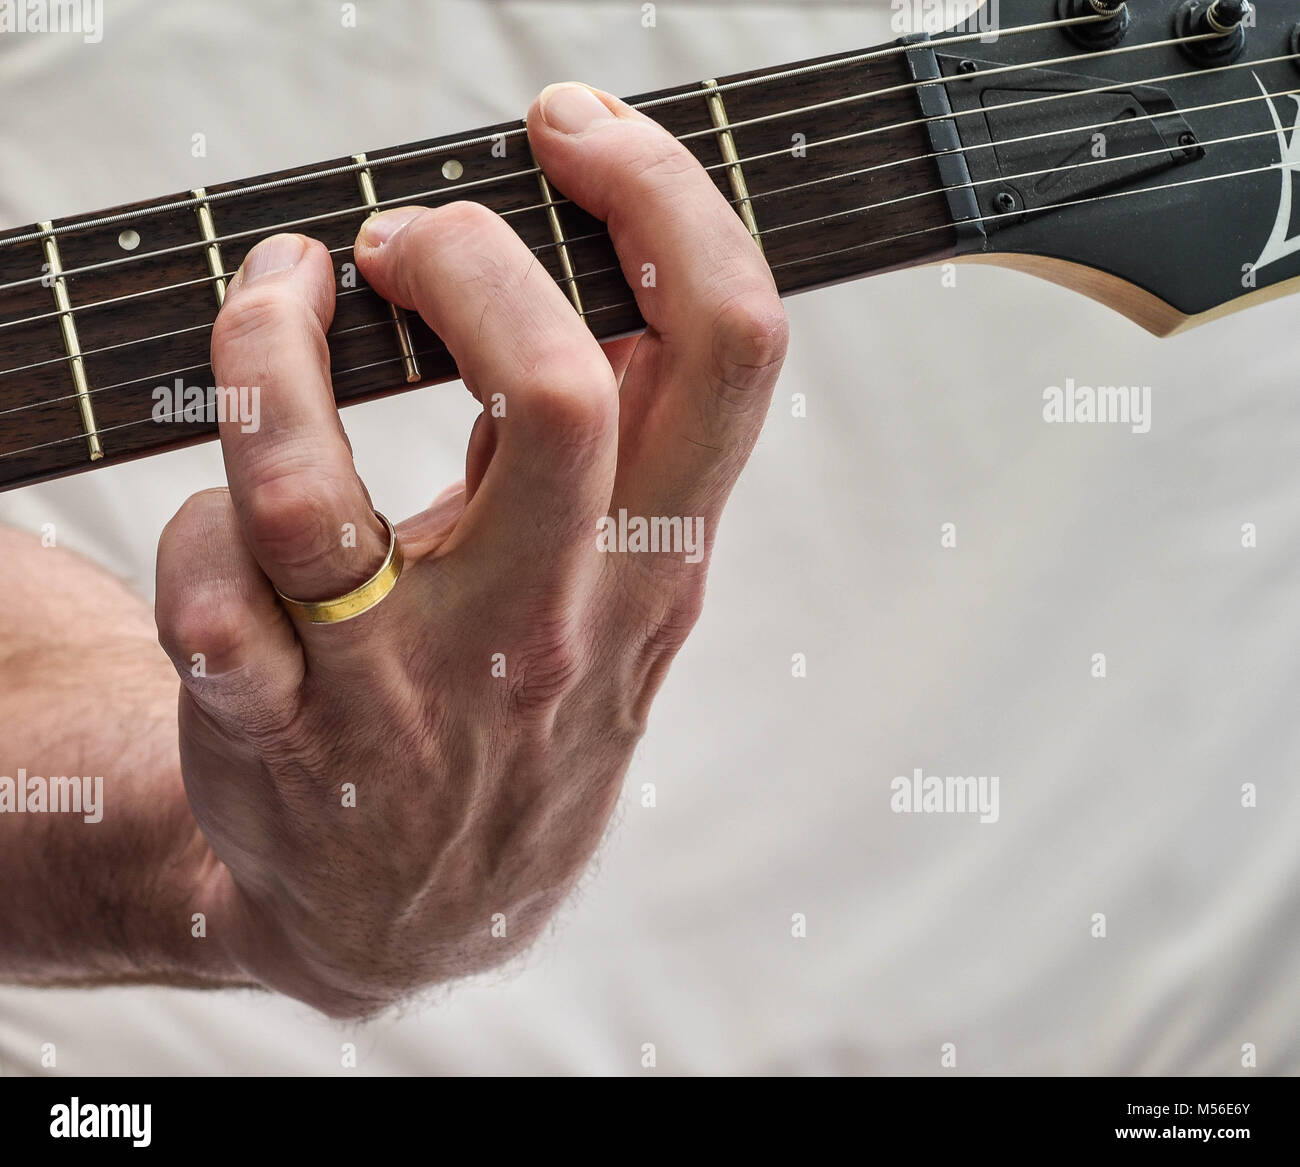 On the Fretboard, playing chords Stock Photo